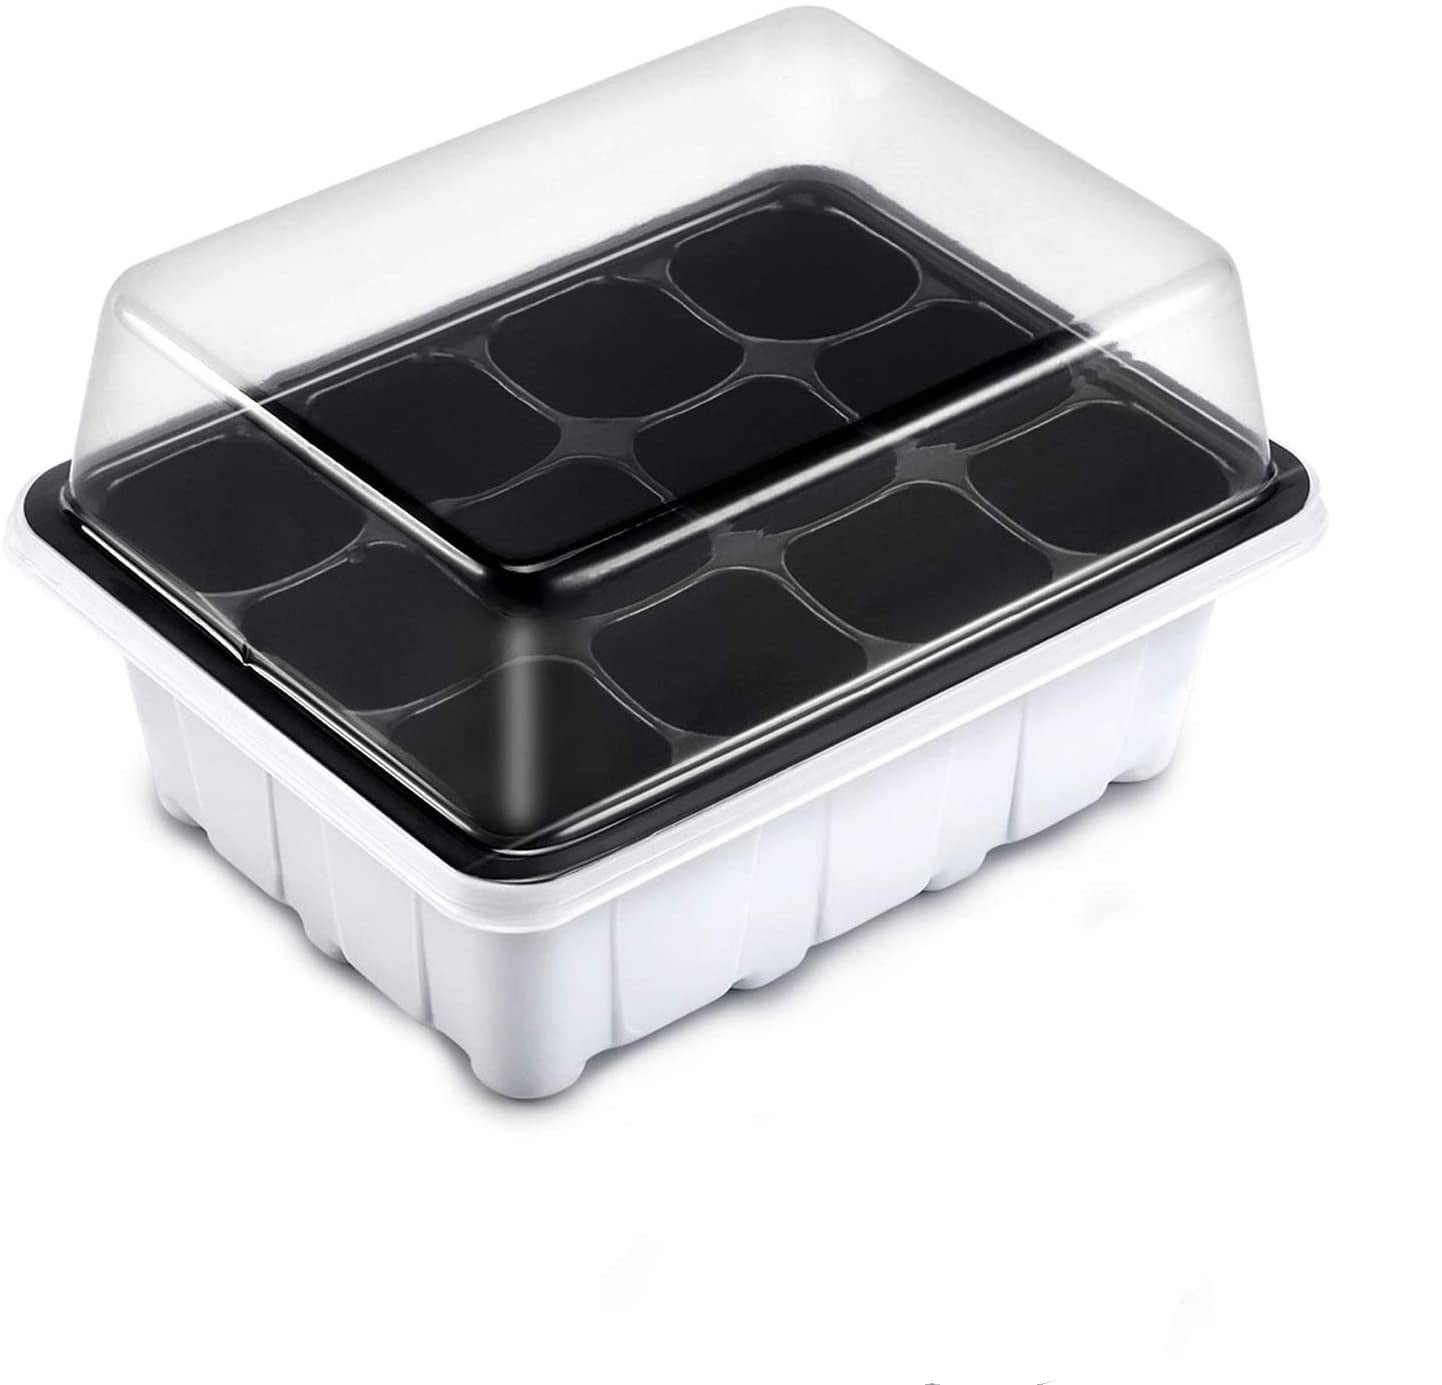 Seedling Starter Tray Humidity Adjustable Dome Lids Greenhouse Grow Trays Nursery Pots Box for Seeds Growing Starting Babody 3 Set Plant Growing Trays 15 Cells Per Tray